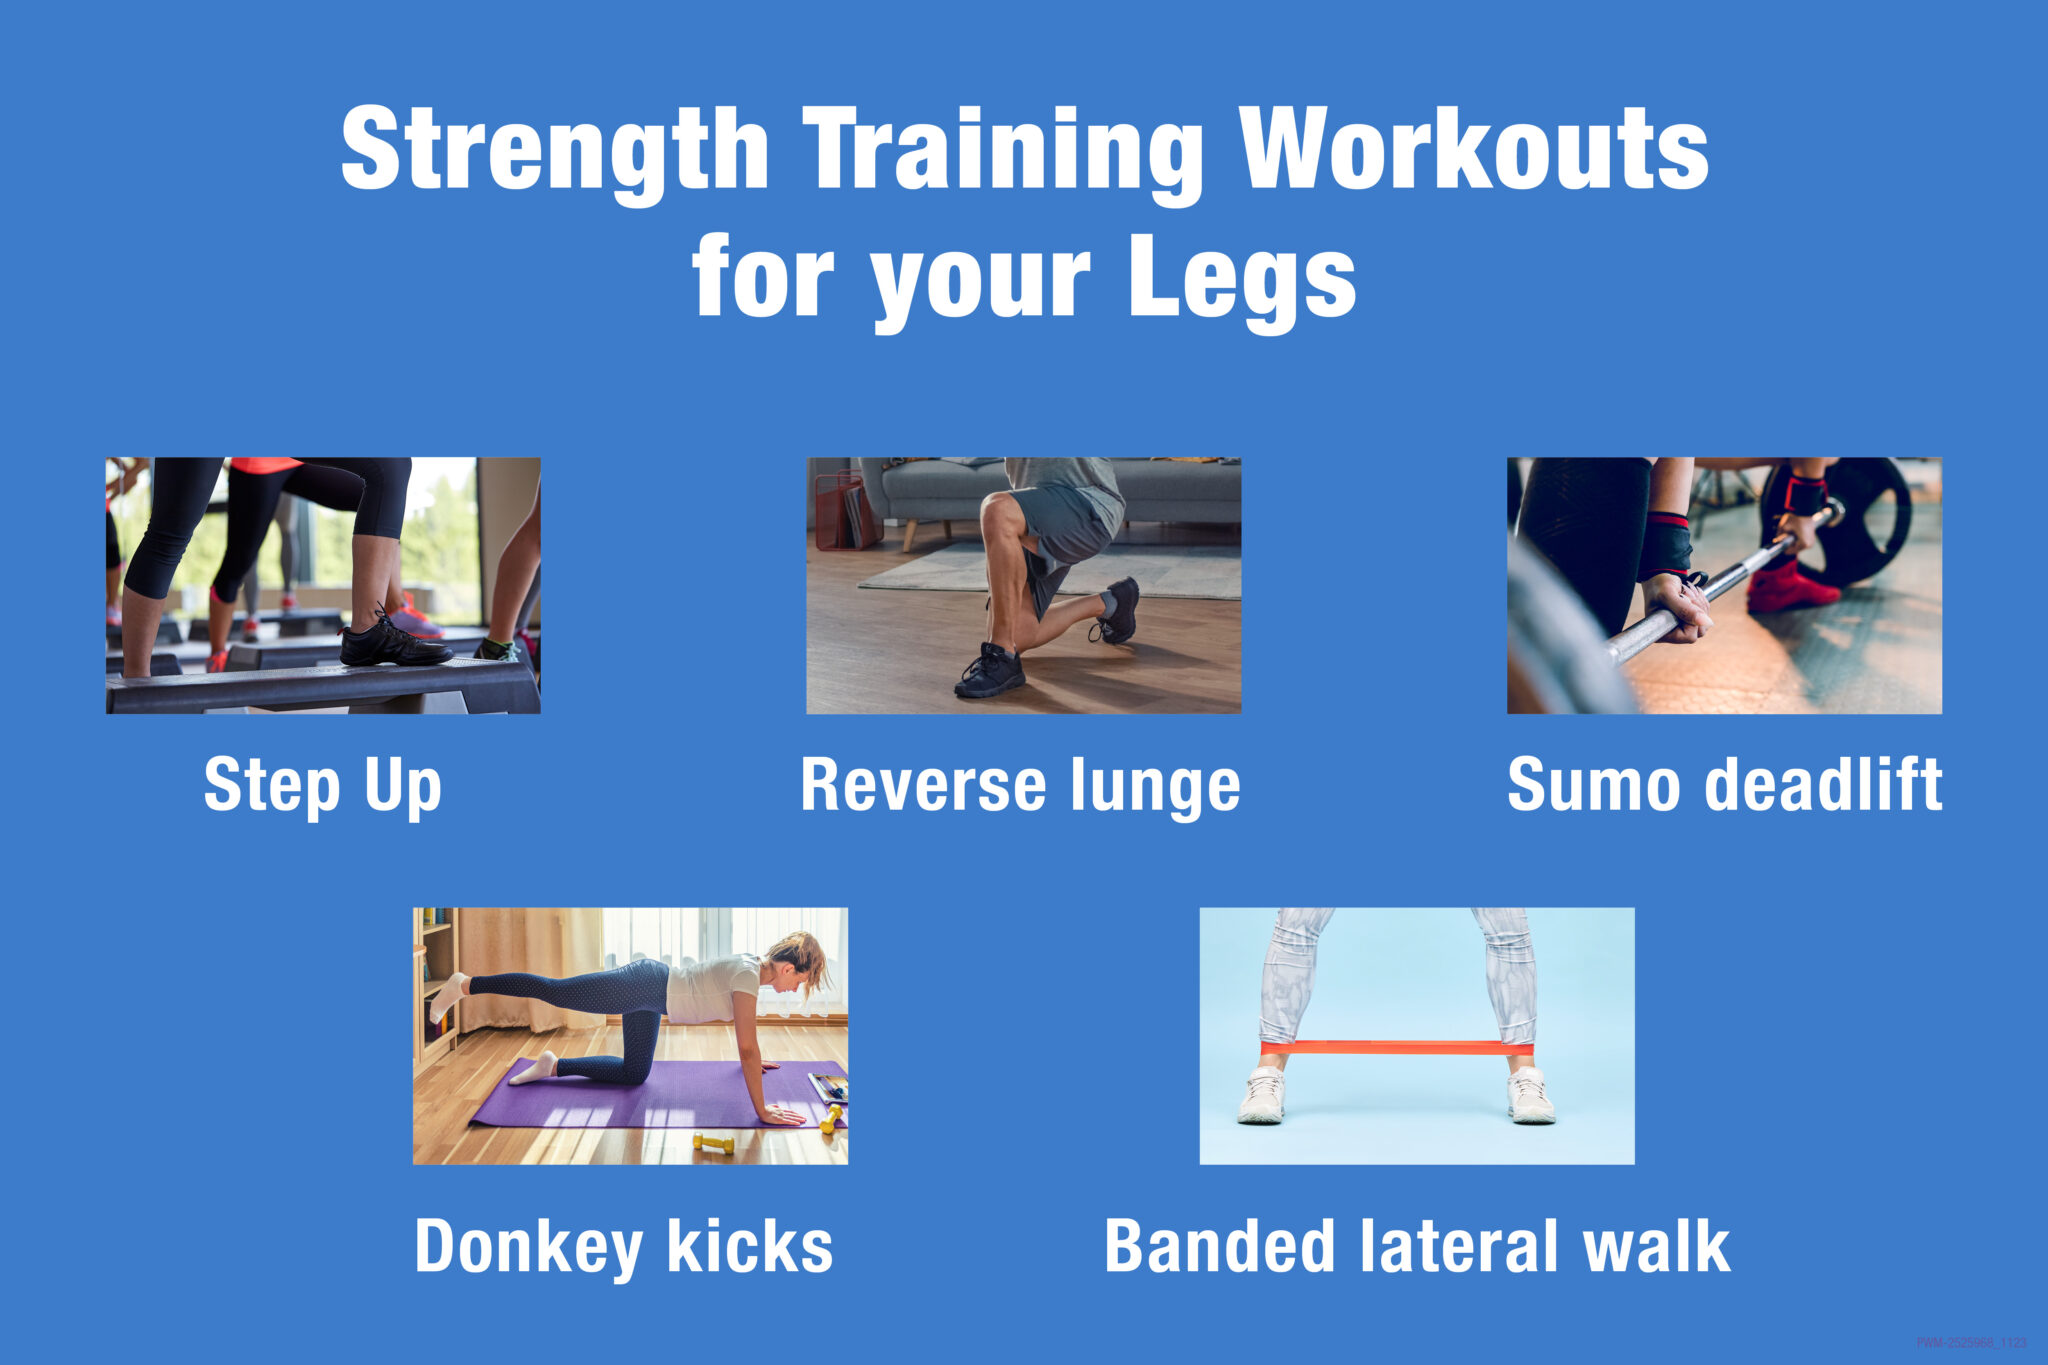 Strength Training Workouts for your Legs